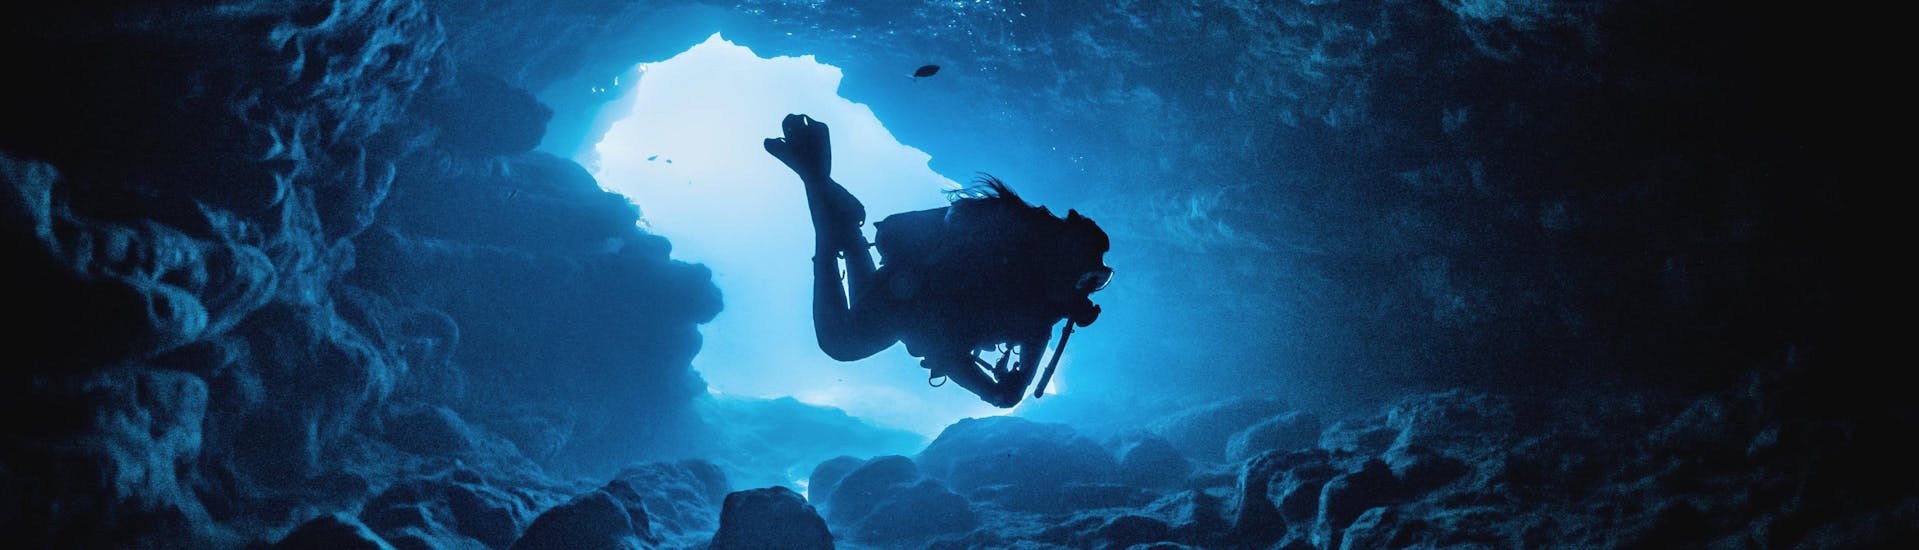 A scuba diver is exploring one of the many caves around the coastline of Malta, one of the famous scuba diving destinations in Europe.